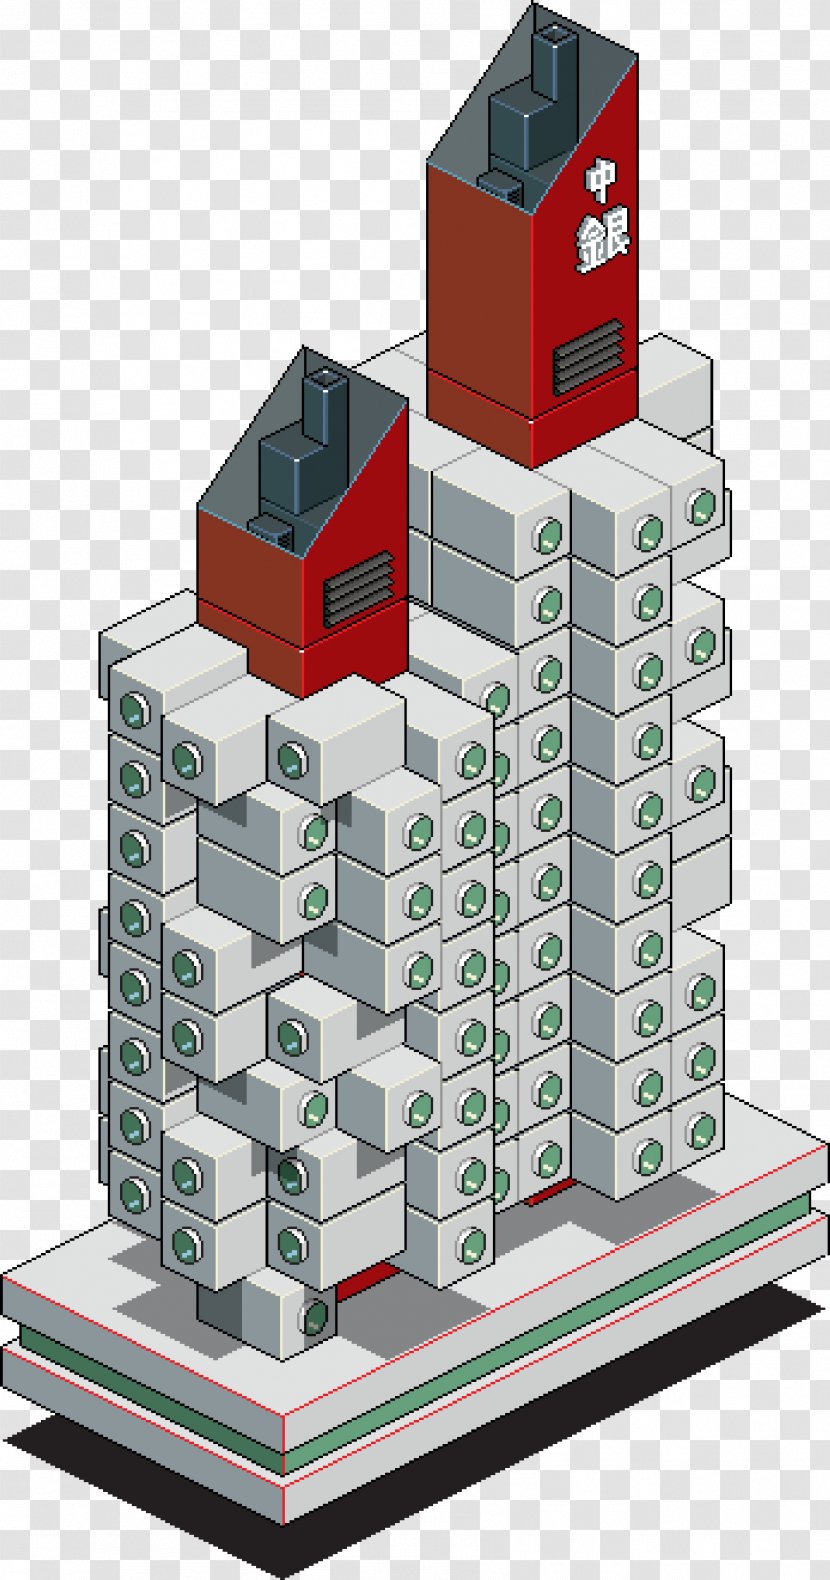 Nakagin Capsule Tower Architecture Building Plan - Architectural Engineering - Buildings Transparent PNG